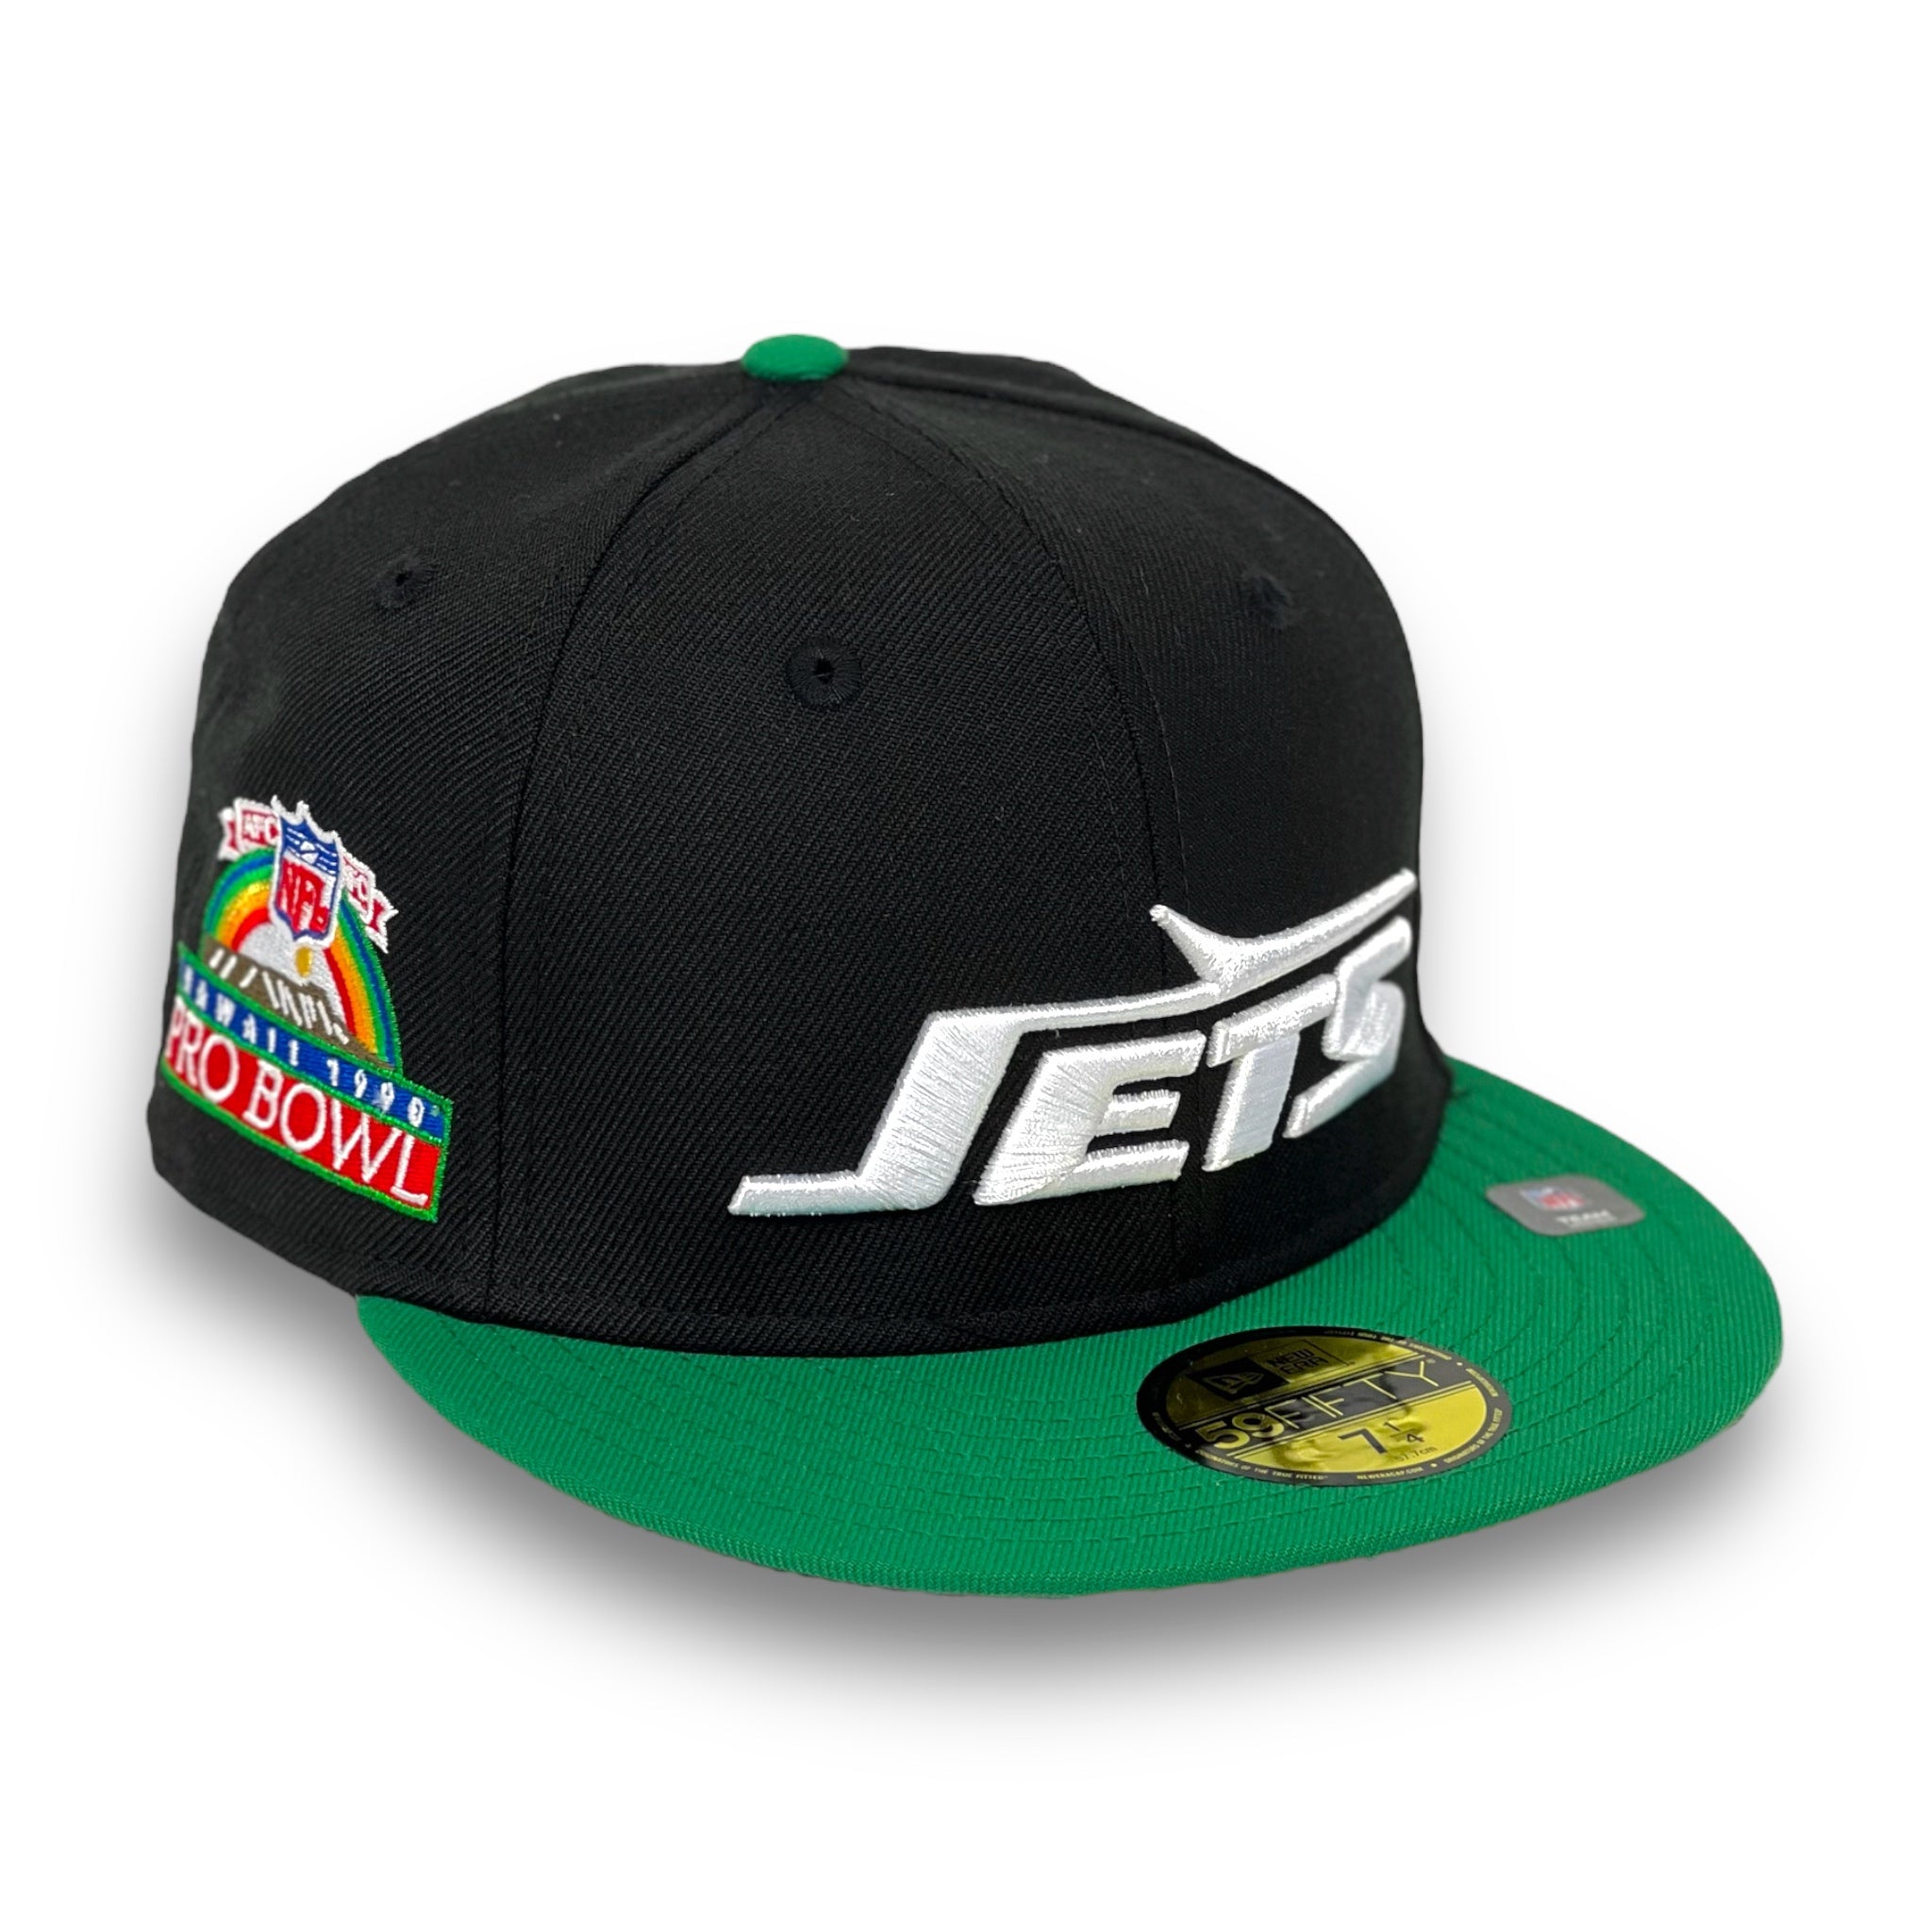 NEW YORK JETS (BLACK) "1990 PRO BOWL" NEW ERA 59FIFTY FITTED